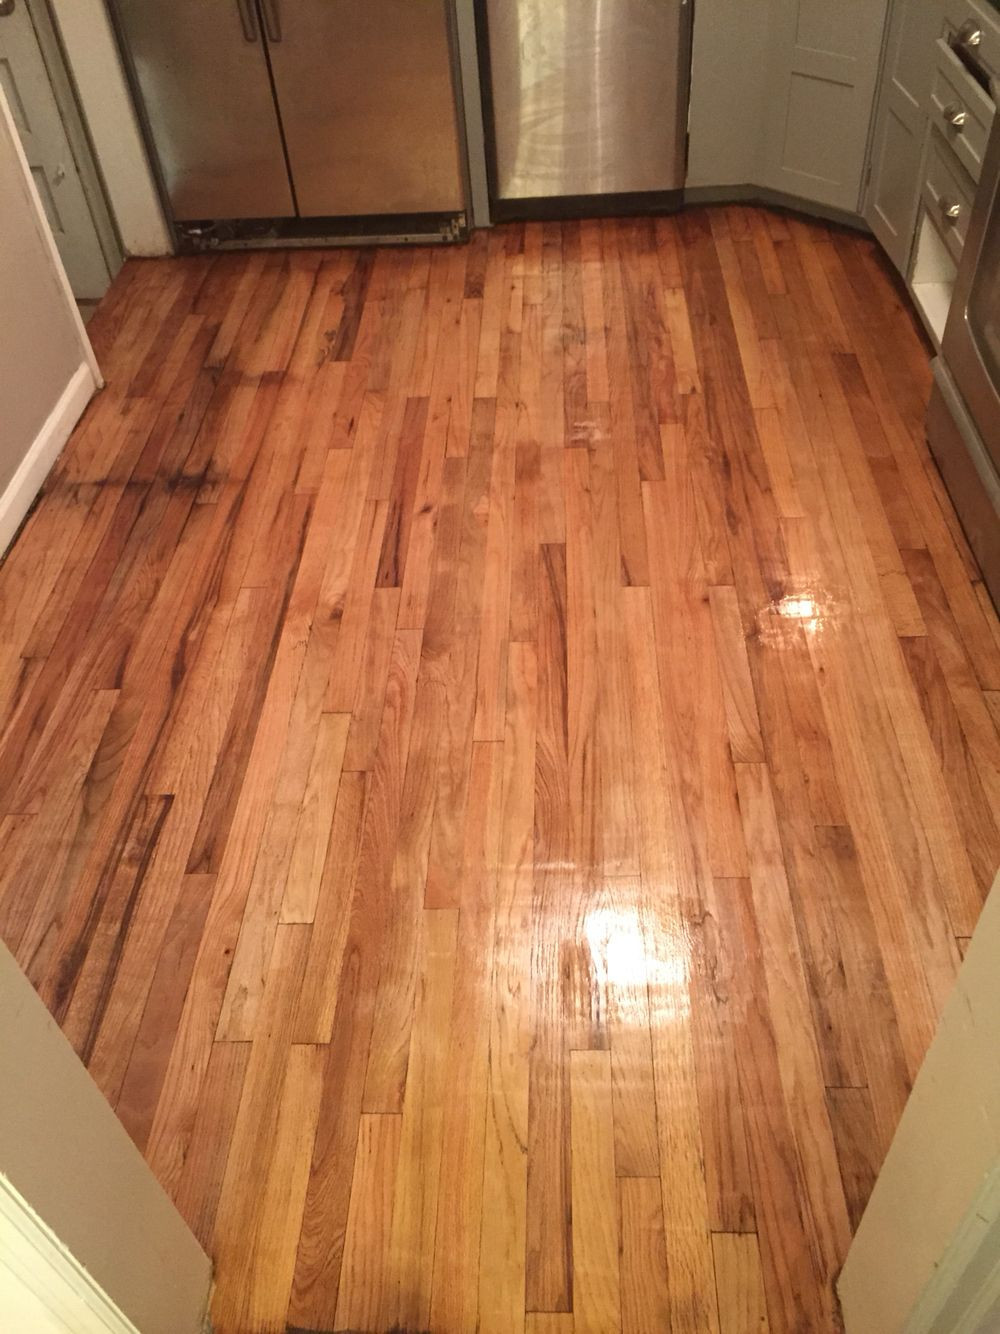 16 Lovely Cost to Sand and Refinish Hardwood Floors 2024 free download cost to sand and refinish hardwood floors of diy hardwood floor refinishing refinished red oak hard wood floors throughout diy hardwood floor refinishing refinished red oak hard wood floors 